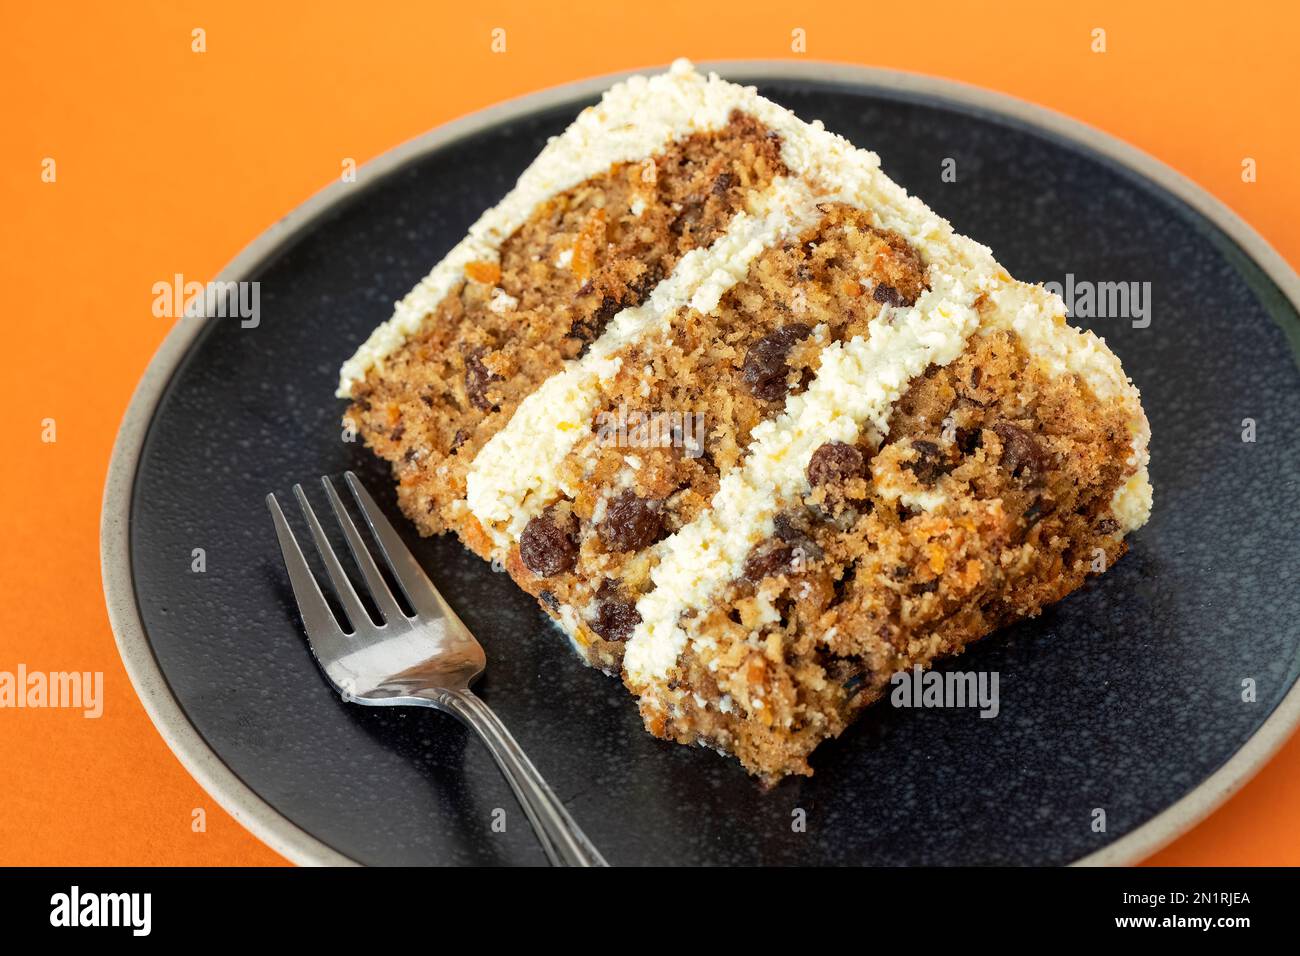 A freshly baked slice of a tiered or layered carrot cake. The cake has three layers with a cream cheese buttercream filling and is served plated Stock Photo